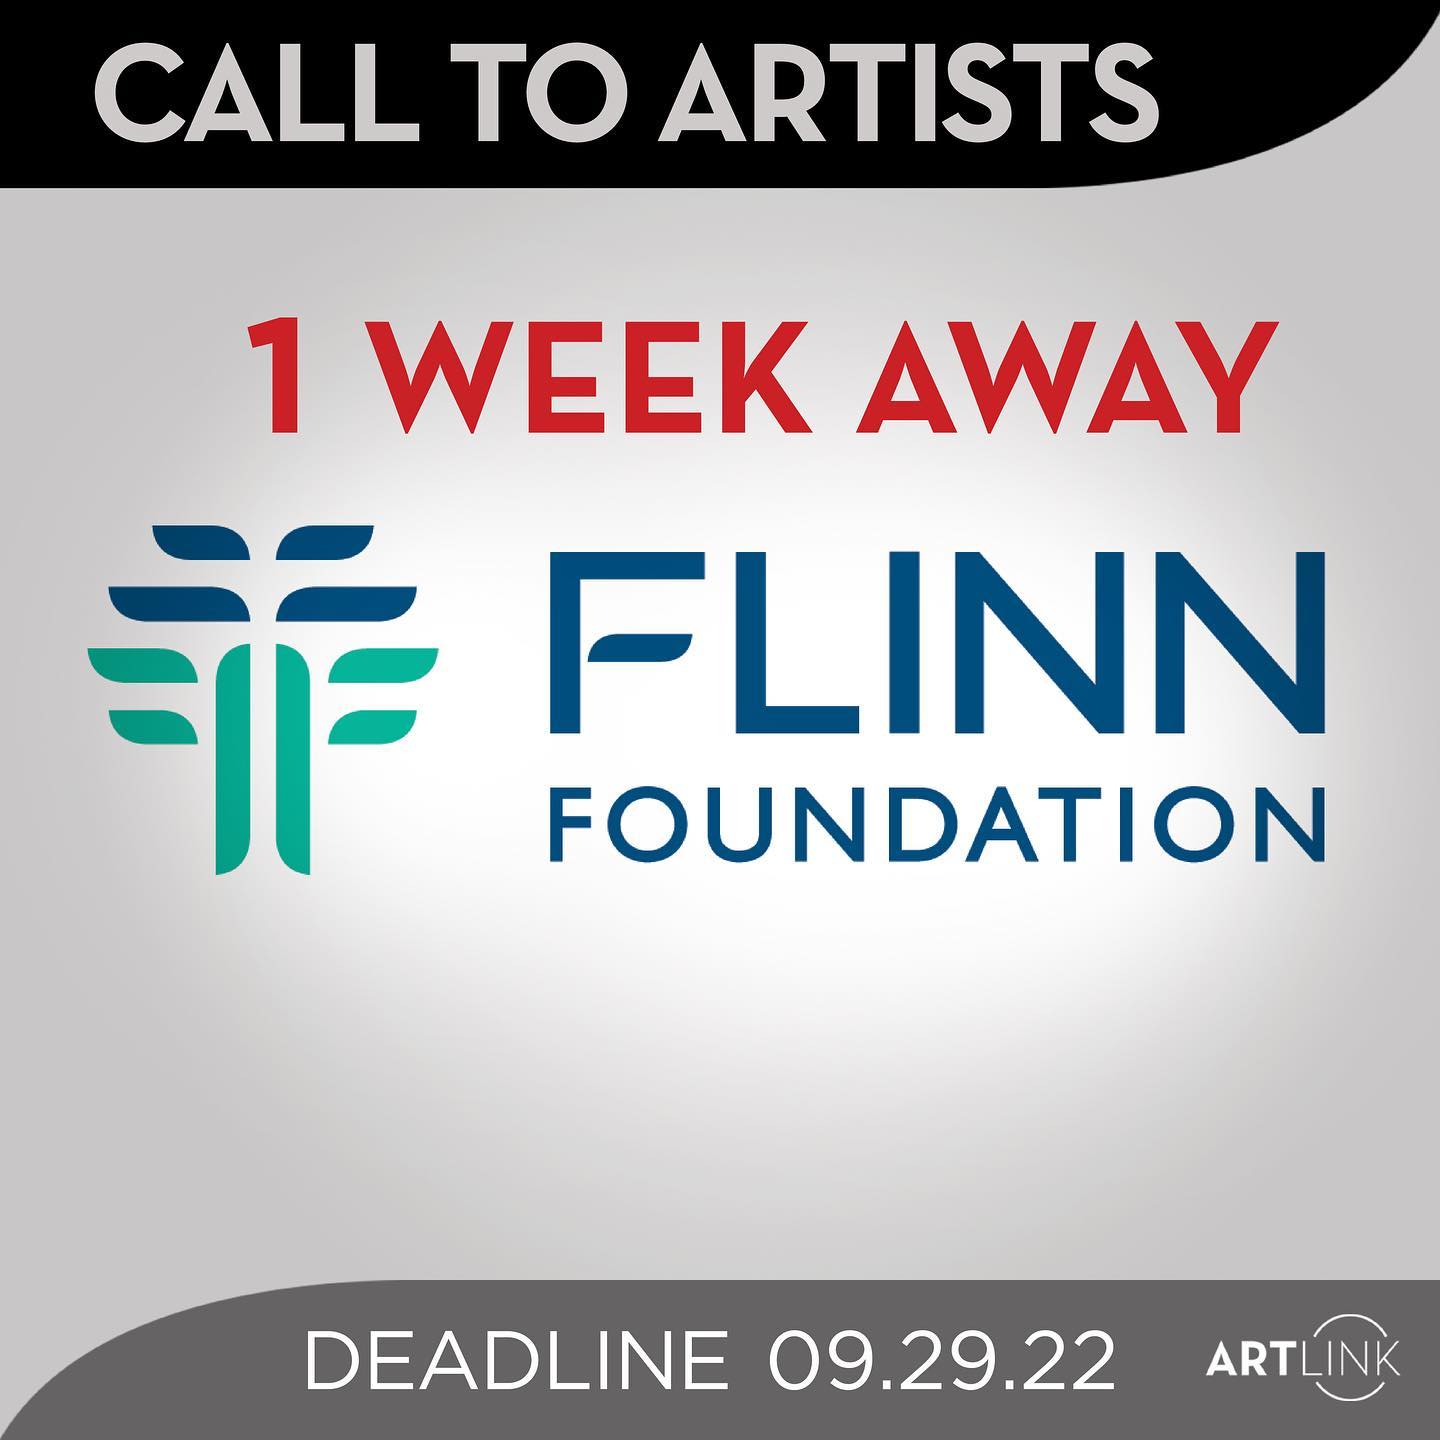 Reminder, DEADLINE is 1 WEEK AWAY! ⏰

The Flinn Foundation kicked off this series of exhibitions in March 2022, with art prominently displayed in the Flinn Foundation's reception area, conference rooms, and an exterior veranda space suitable for sculpture. The Foundation's unique building in the heart of Phoenix—adjacent to the Arizona Opera and across the street from the Phoenix Art Museum—is now a site where Arizona artists can exhibit their work, emphasizing to all who enter that the arts are vital to the quality of life in Arizona. While the facility is private, the Foundation regularly convenes leaders in workshops and educational forums at the conference center within the building.

A selection panel composed of Flinn Foundation representatives will consider the following artworks for the exhibition: oil, acrylic, watercolor, graphite, charcoal, pastels, photography, ceramics (wall-hanging ceramics only), printmaking, textile, mixed media, and exterior sculpture. The artworks will be available for purchase and all art sales will be facilitated without a commission. In addition, selected artists will receive a $200 honorarium for a contributed artwork to the exhibition.

Artists, don't miss this opportunity to submit your work to be considered as part of this exhibition, opening this fall! 

Link to submit: 
https://artlinkinc.submittable.com/submit